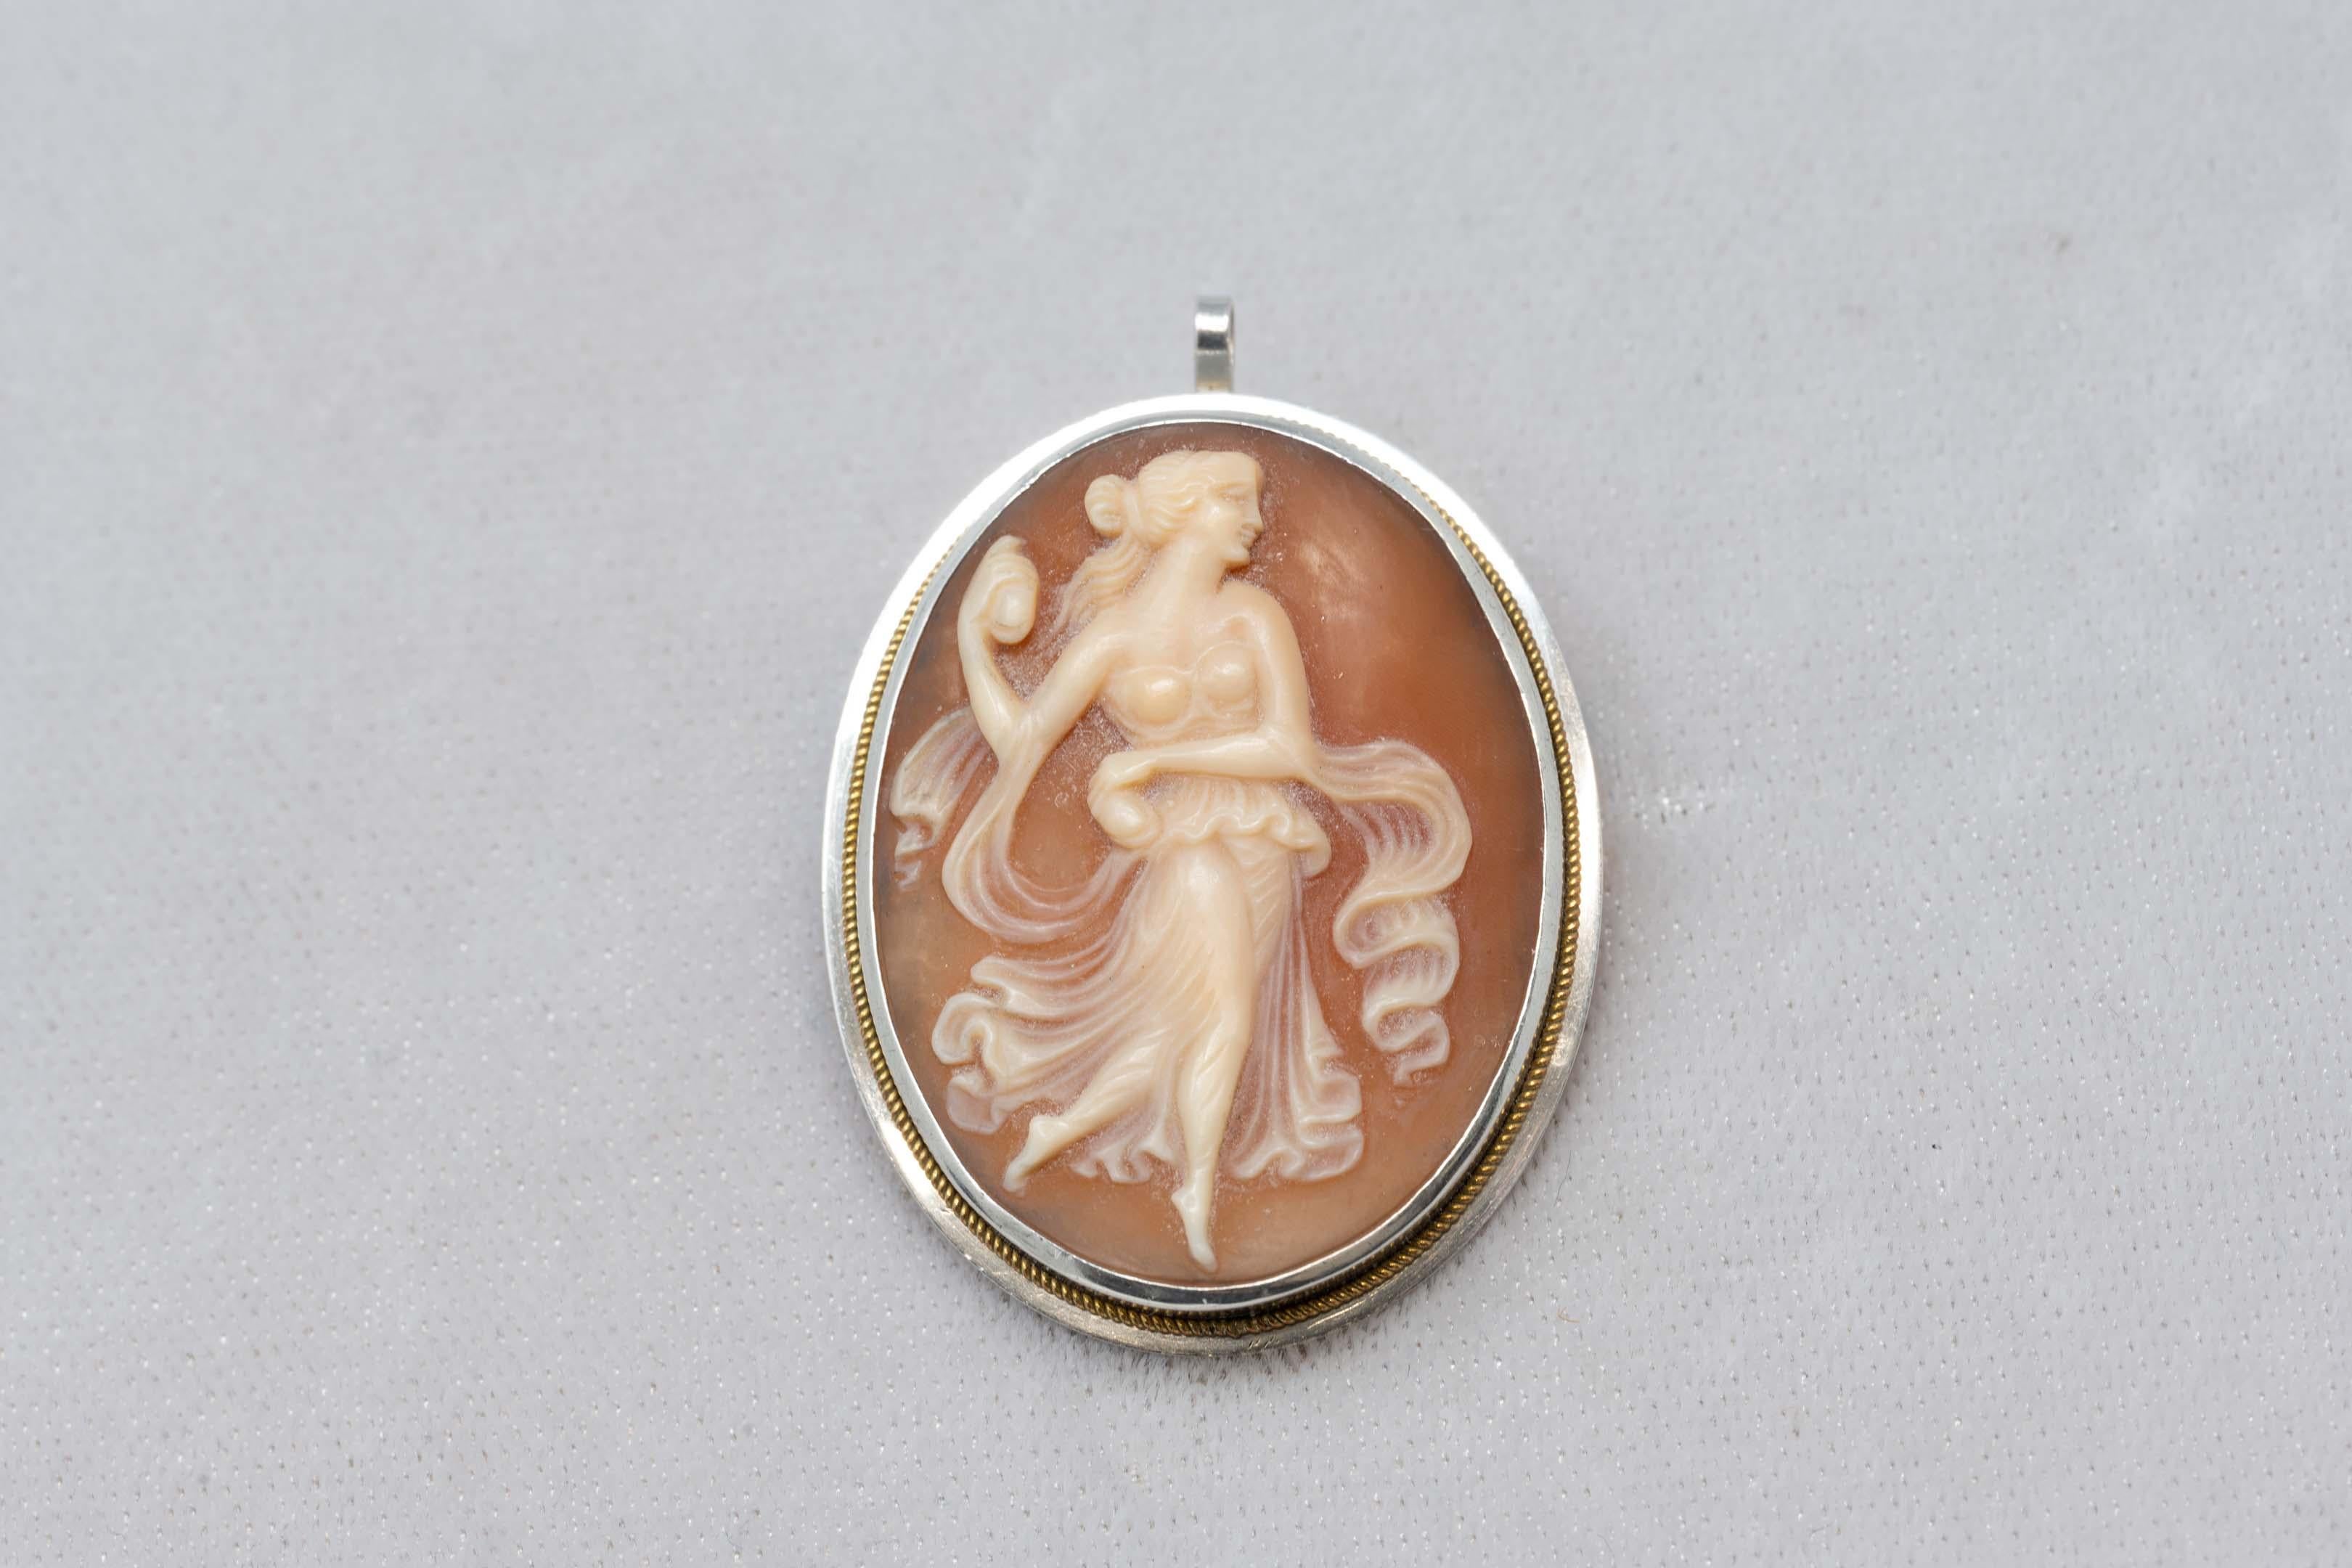 Italian solid silver and 14k gold shell cameo brooch pendant of a carved lady surrounded with gold bezel. Made in Italy, measures 42mm x 32mm, marked on the pin. 